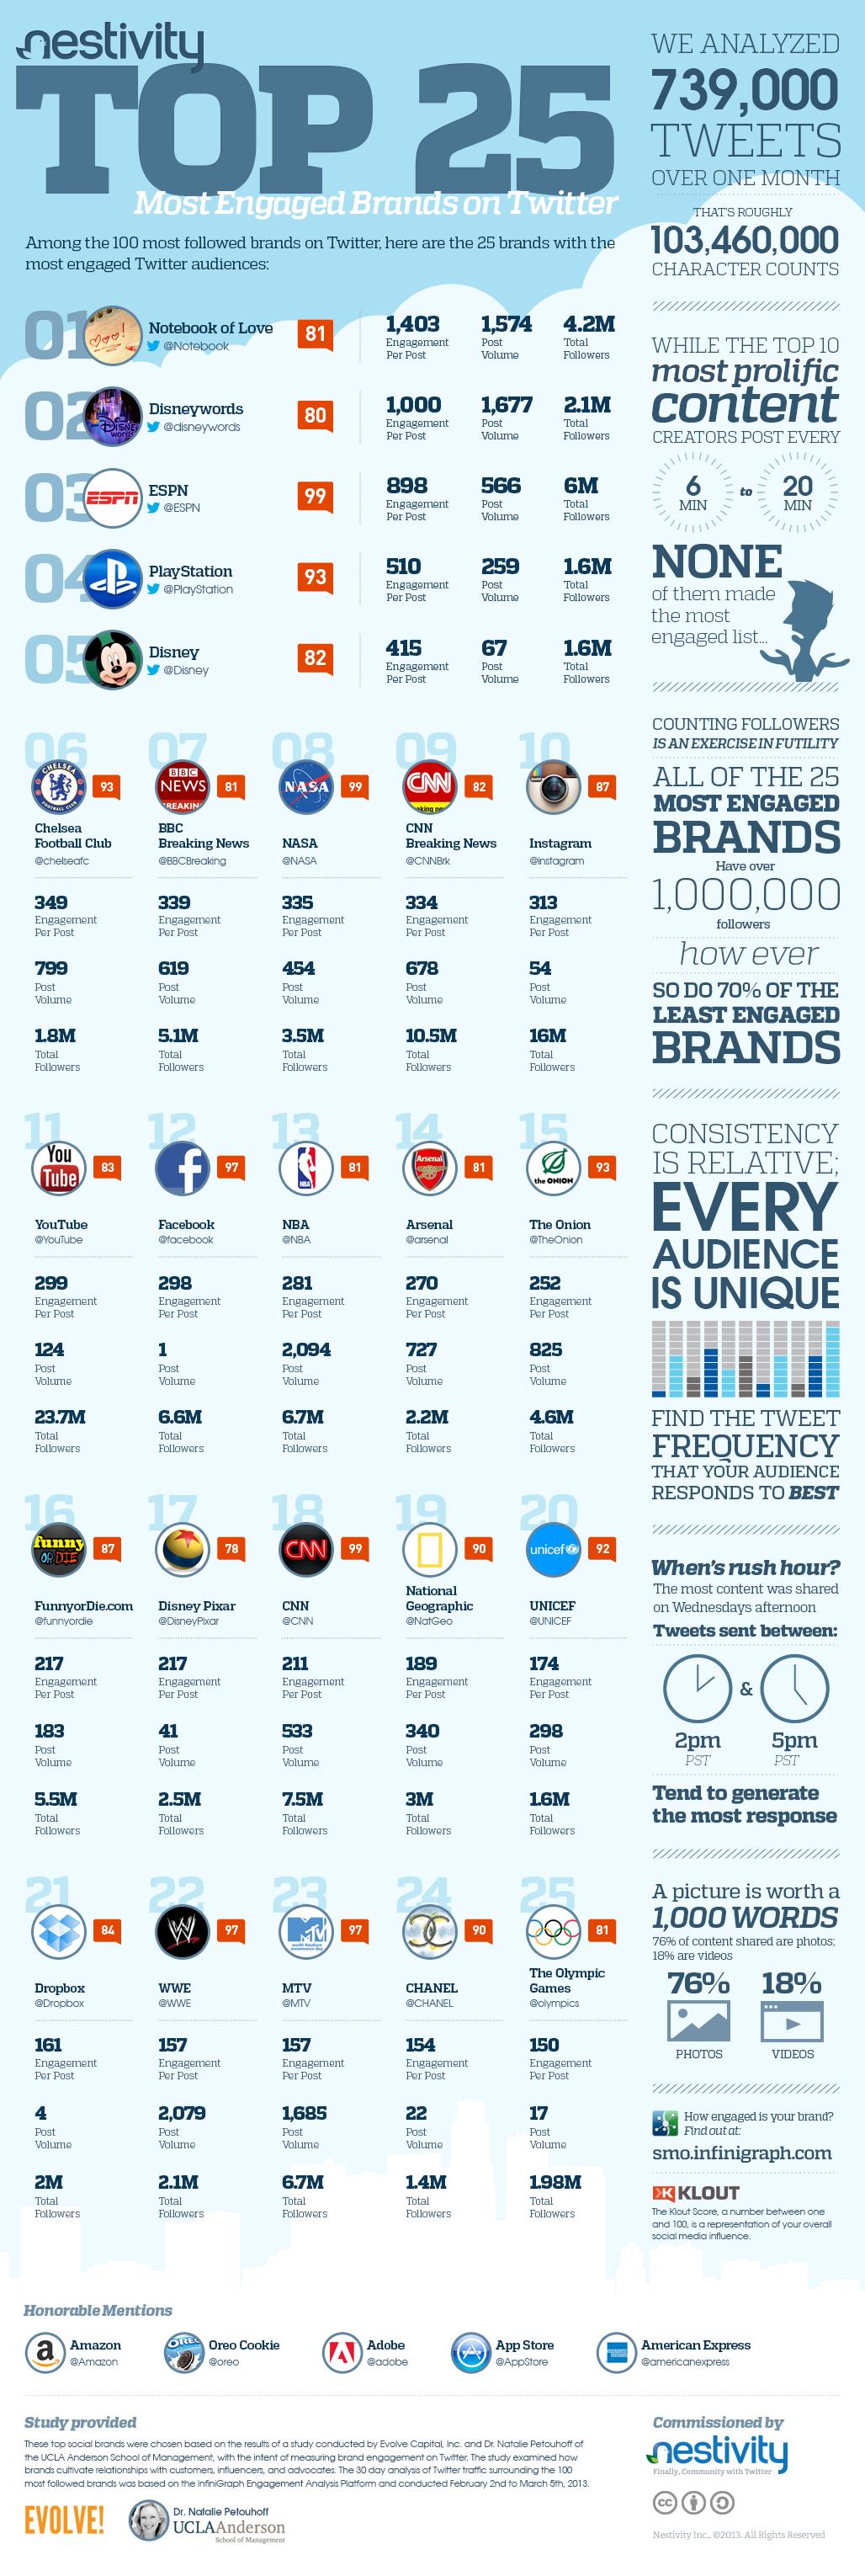 The Most Engaged Brands on Twitter